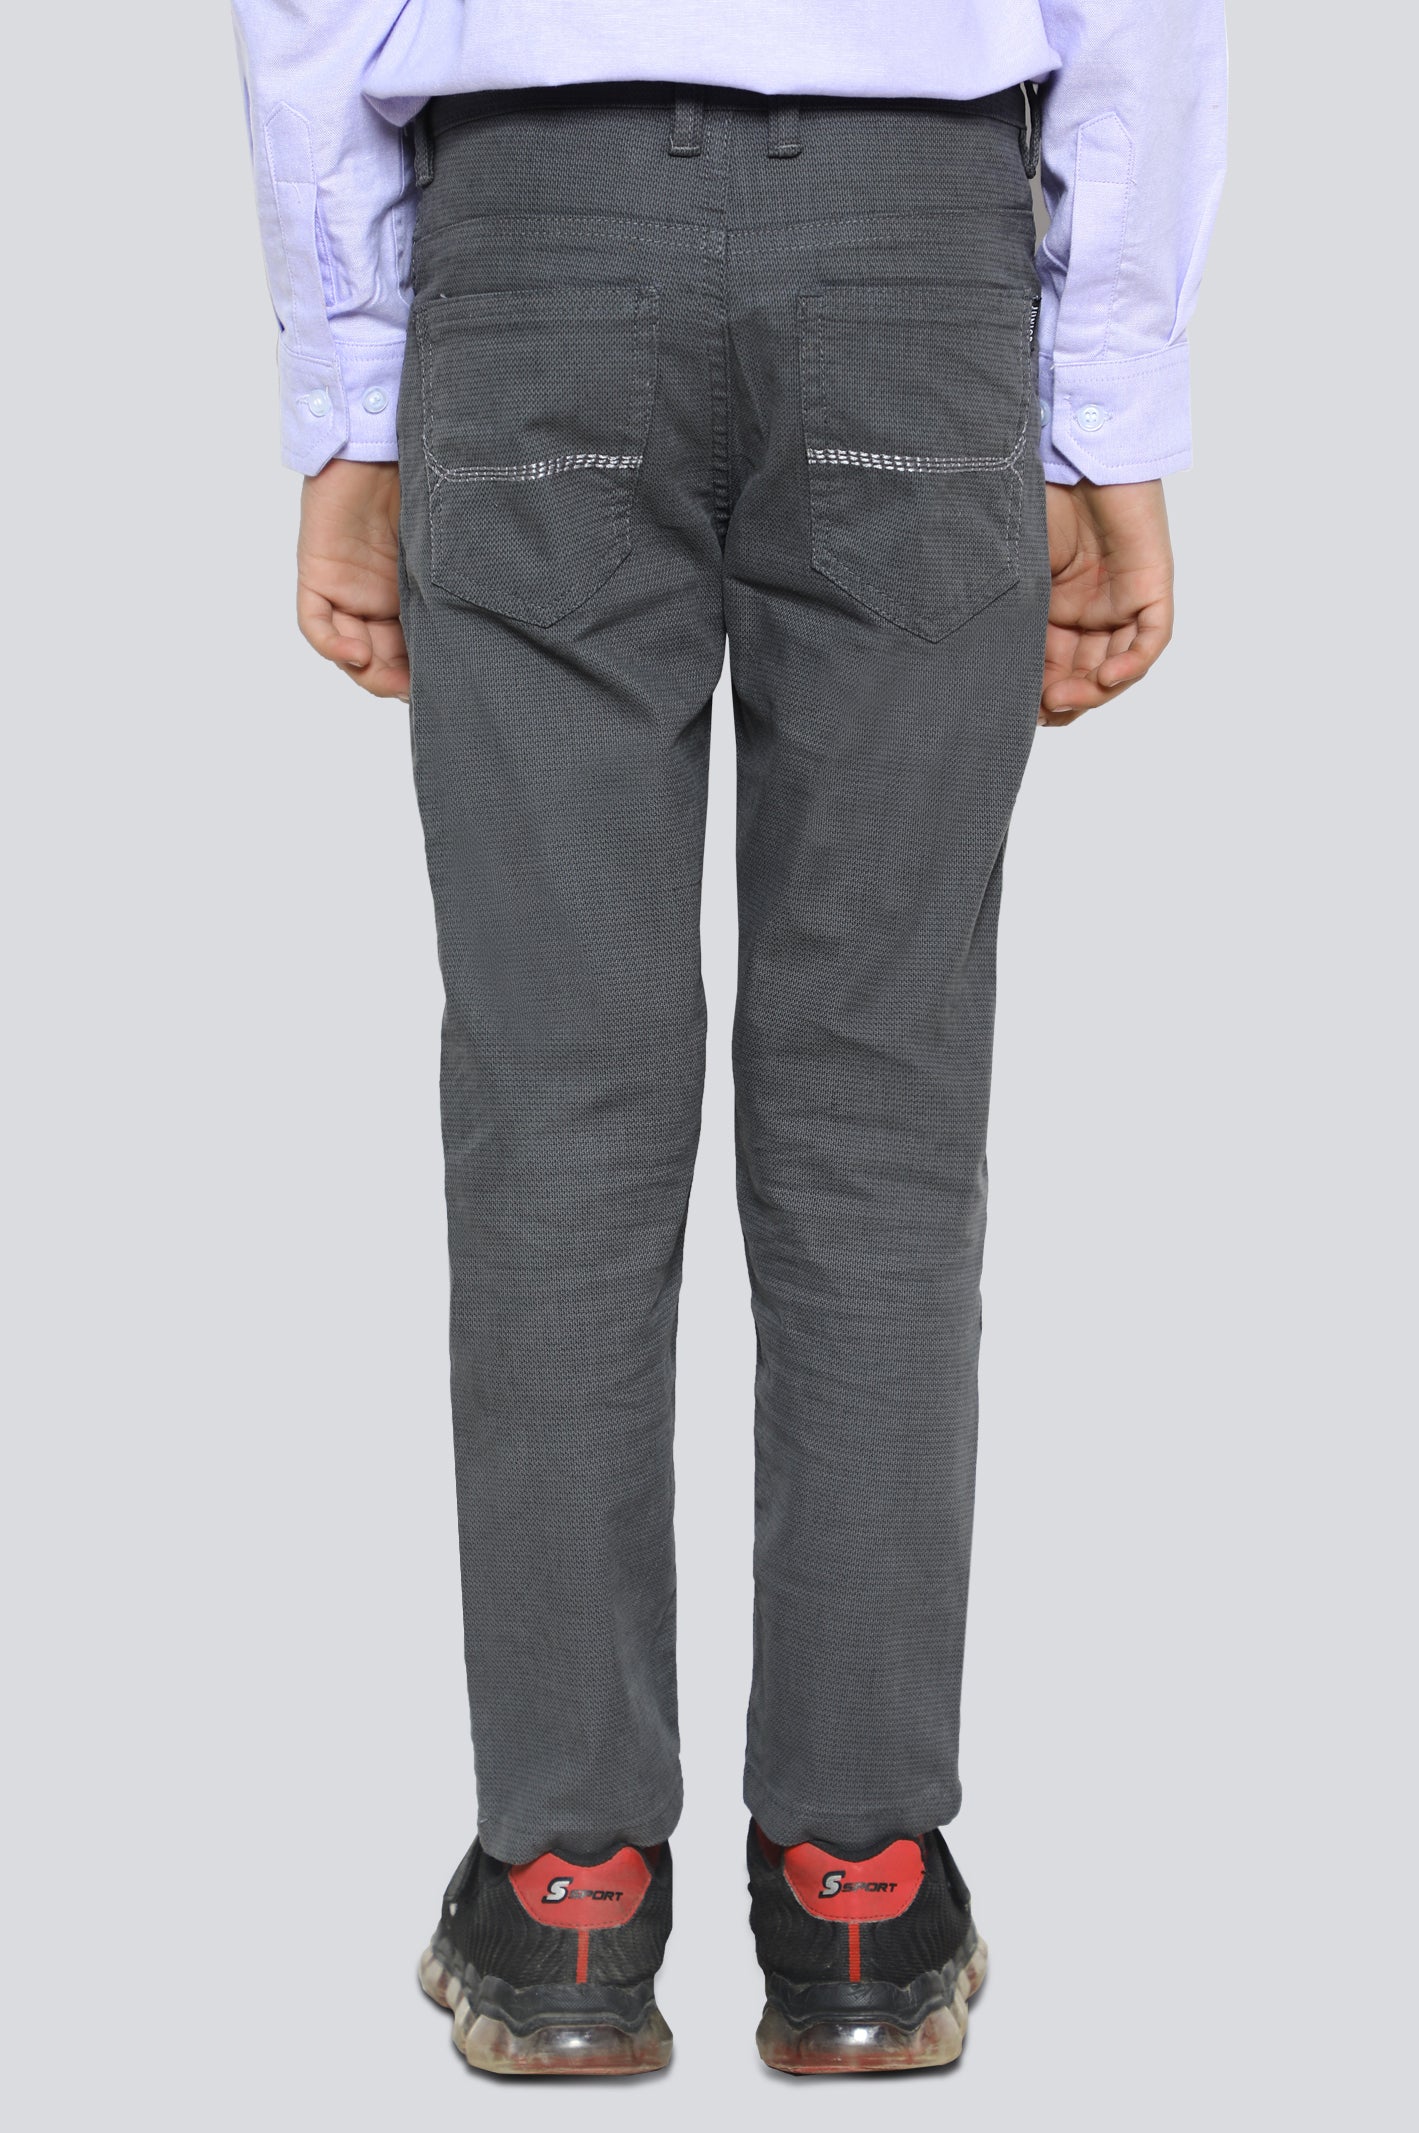 Chino Trouser for Boys - Diners